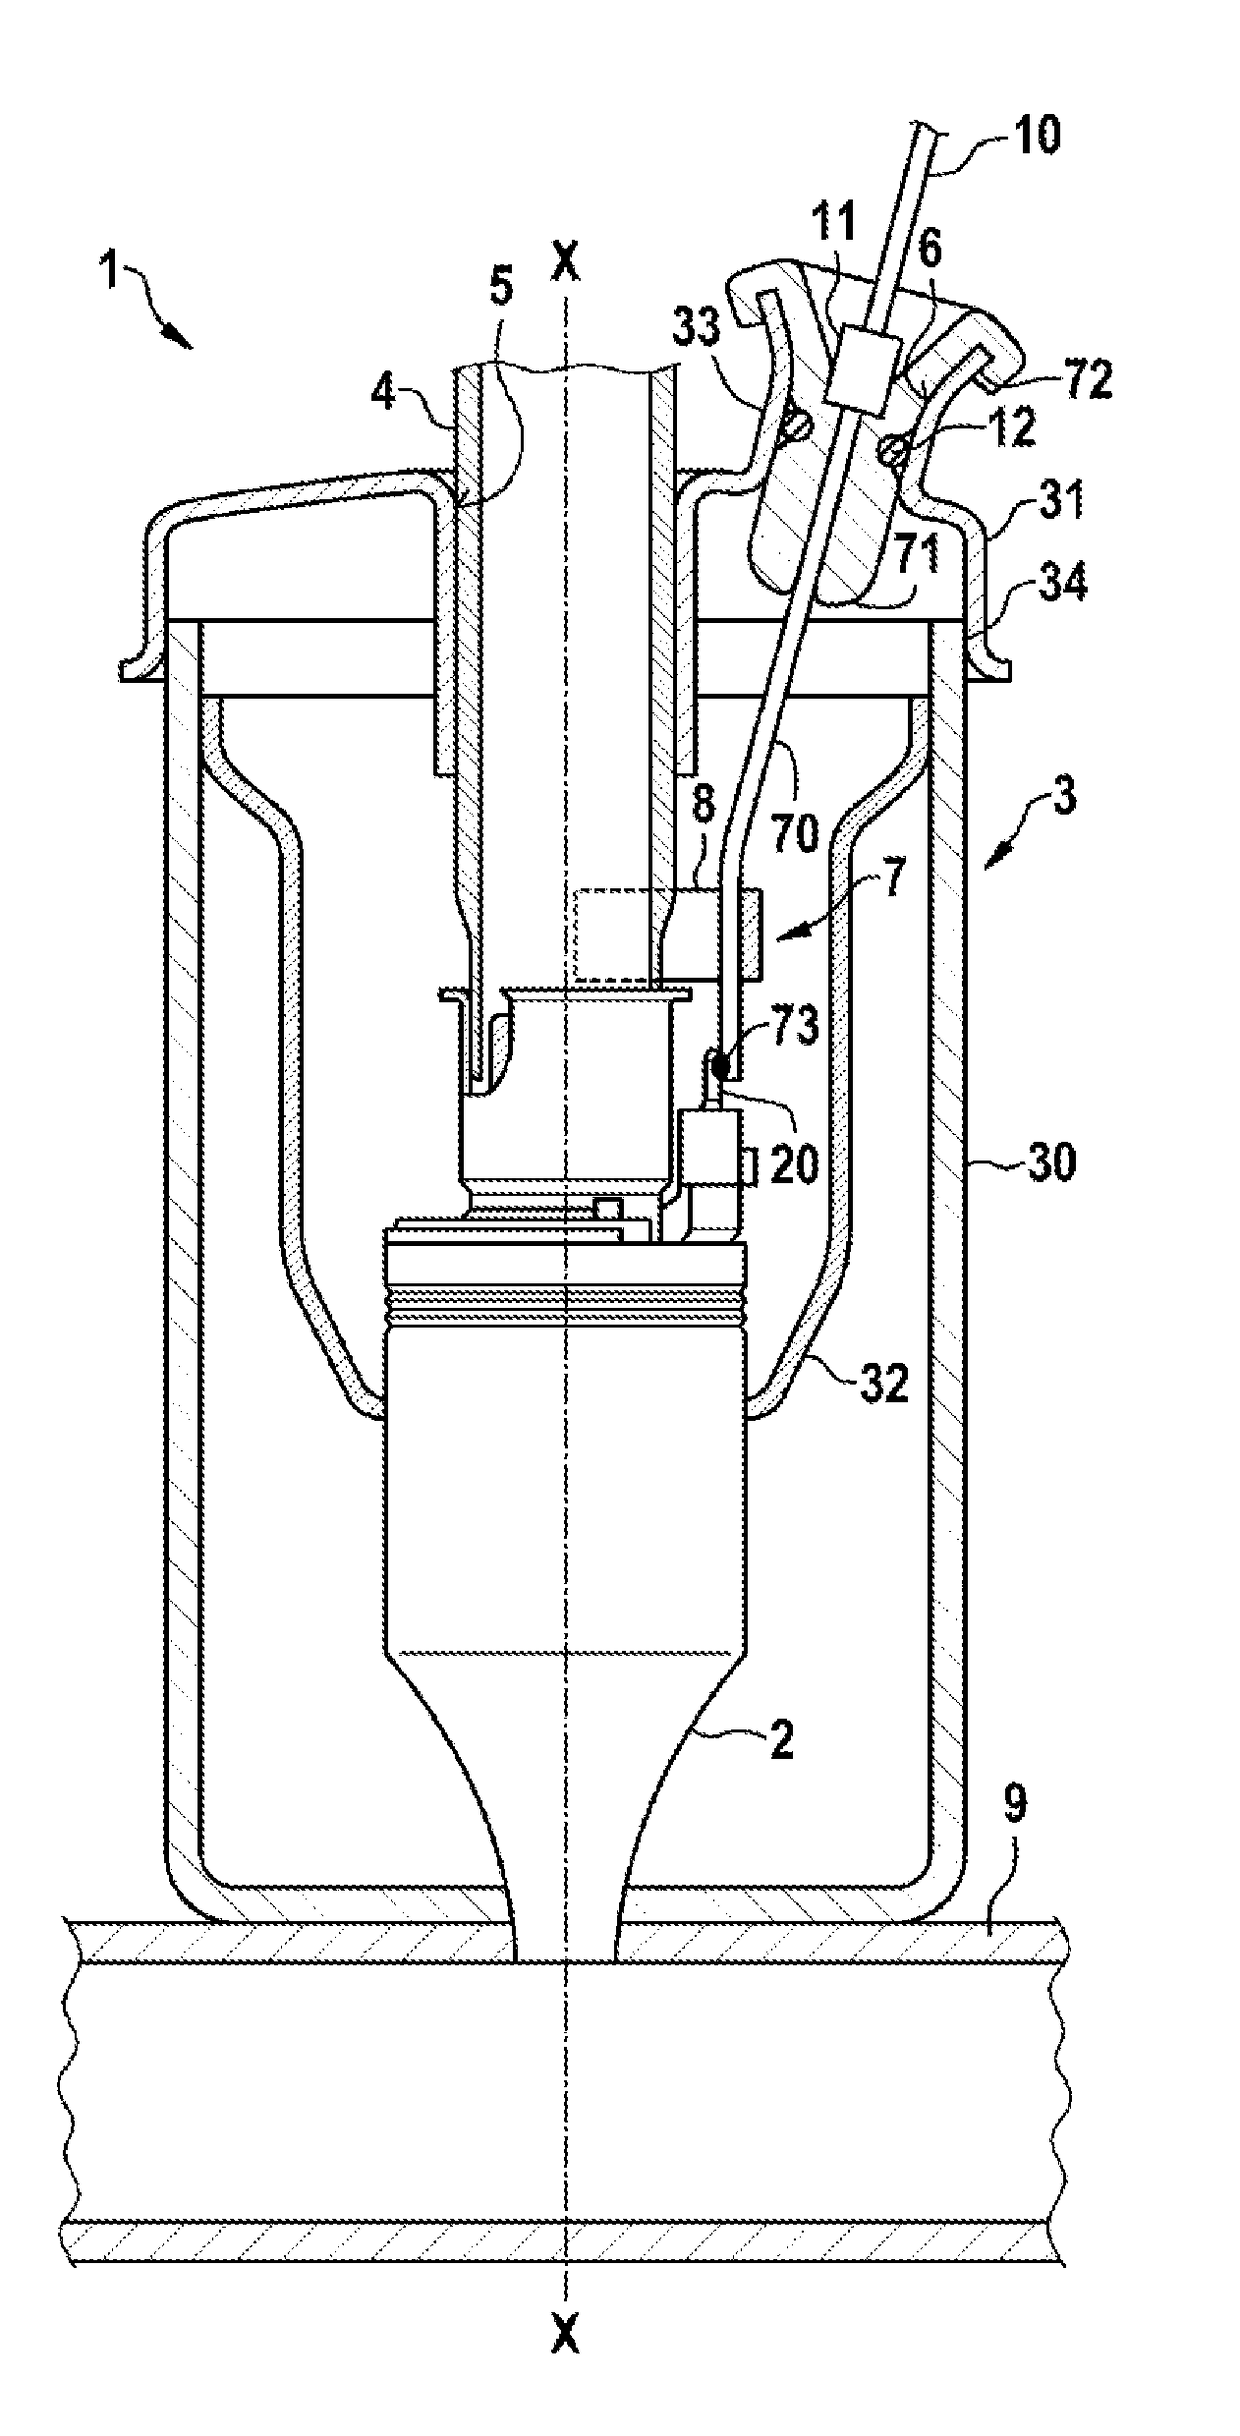 Injector assembly for metering a fluid into an exhaust line